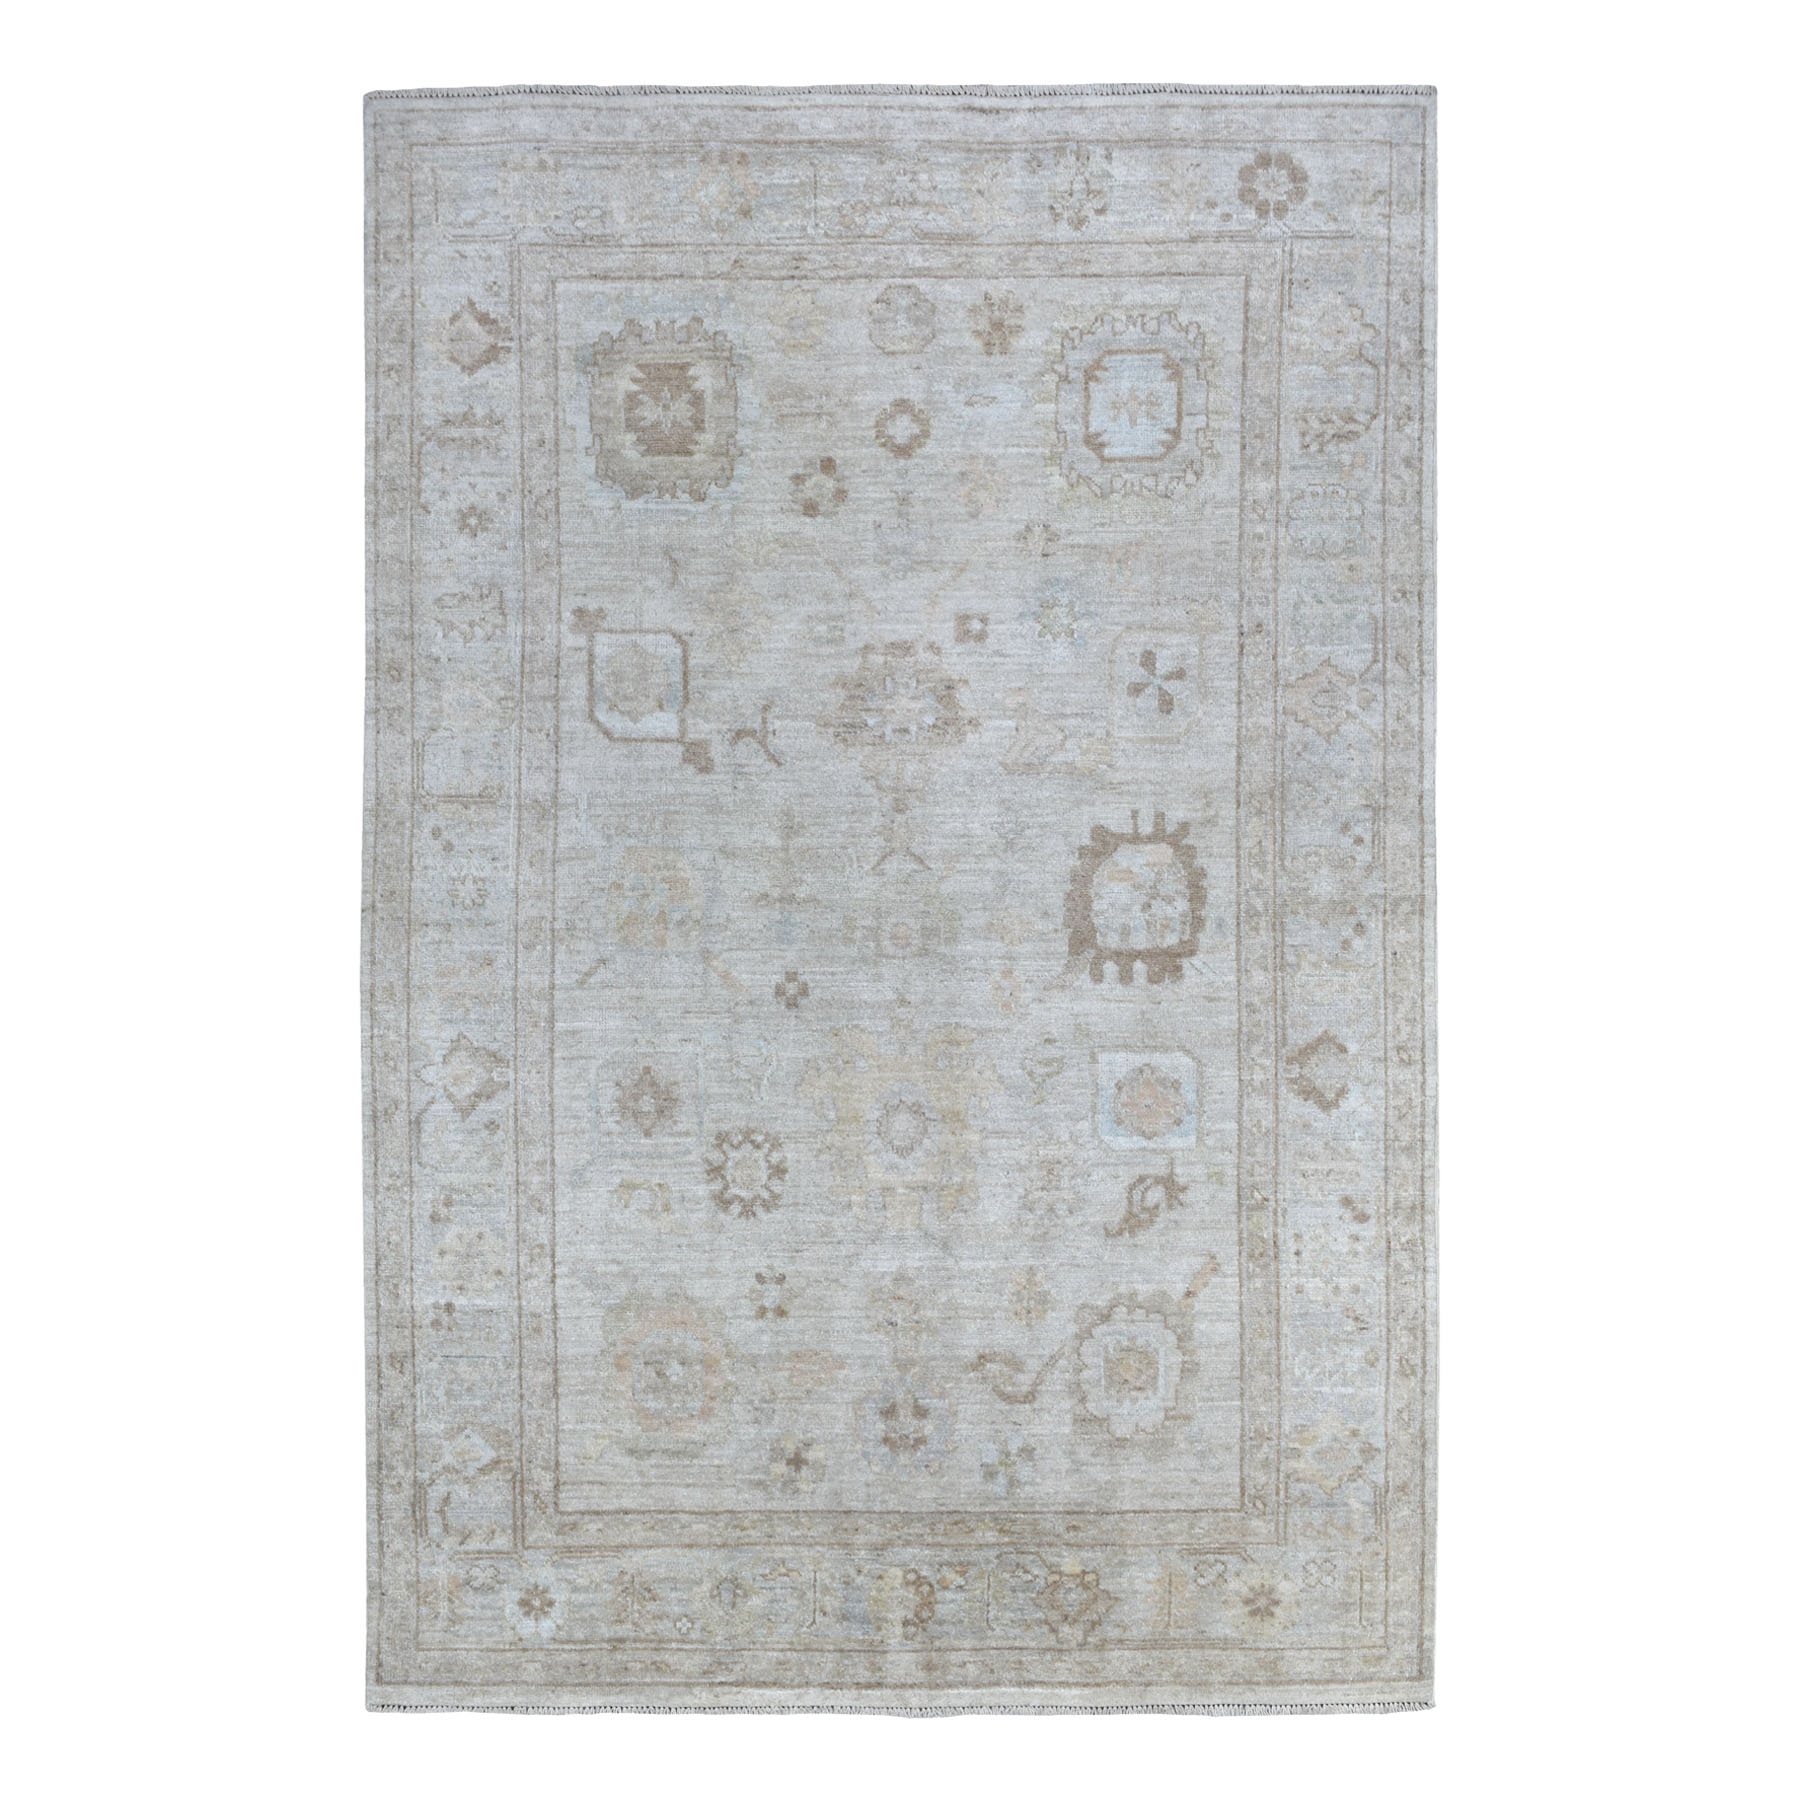 Agra And Turkish Collection Hand Knotted Grey Rug No: 1113252